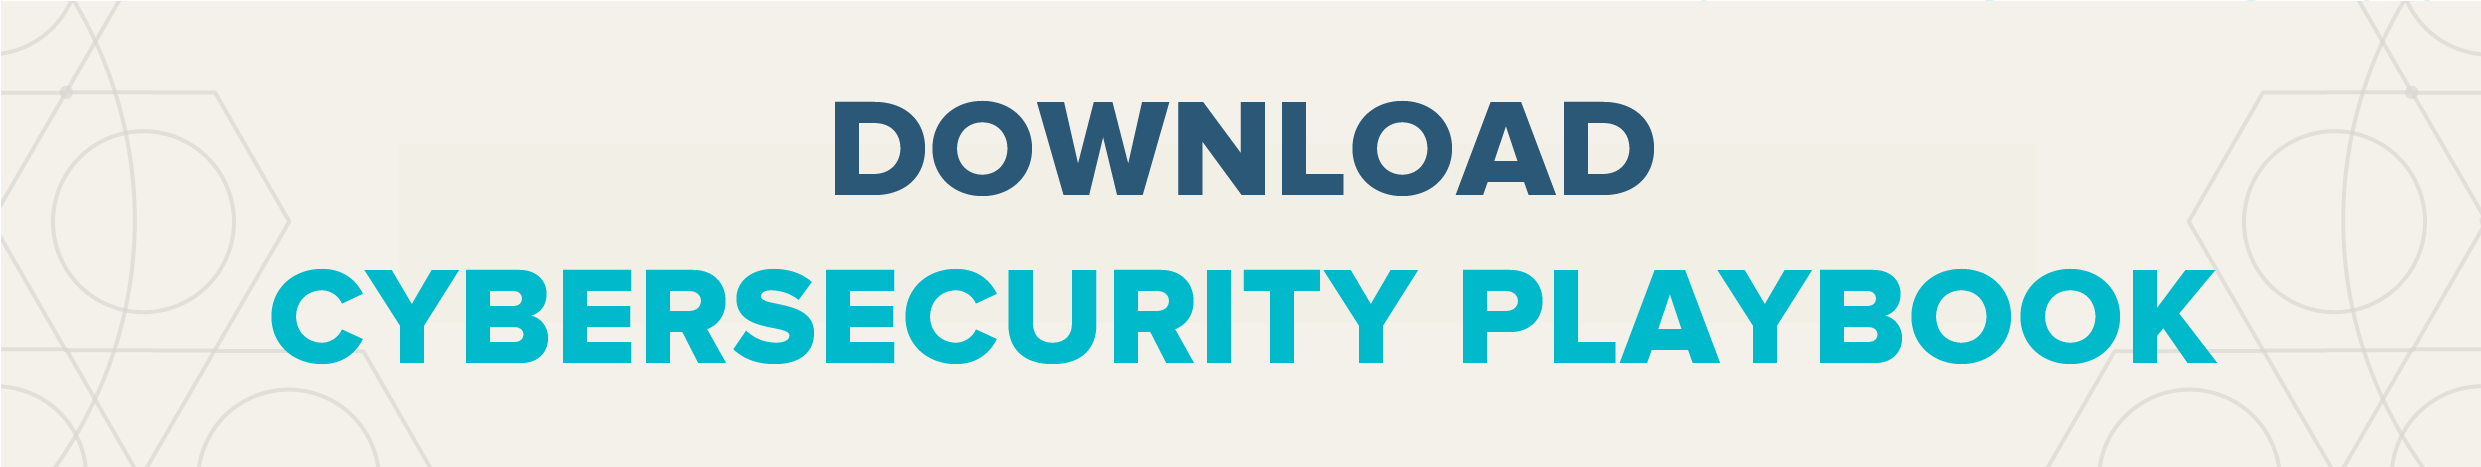 "Download Cybersecurity Playbook" button